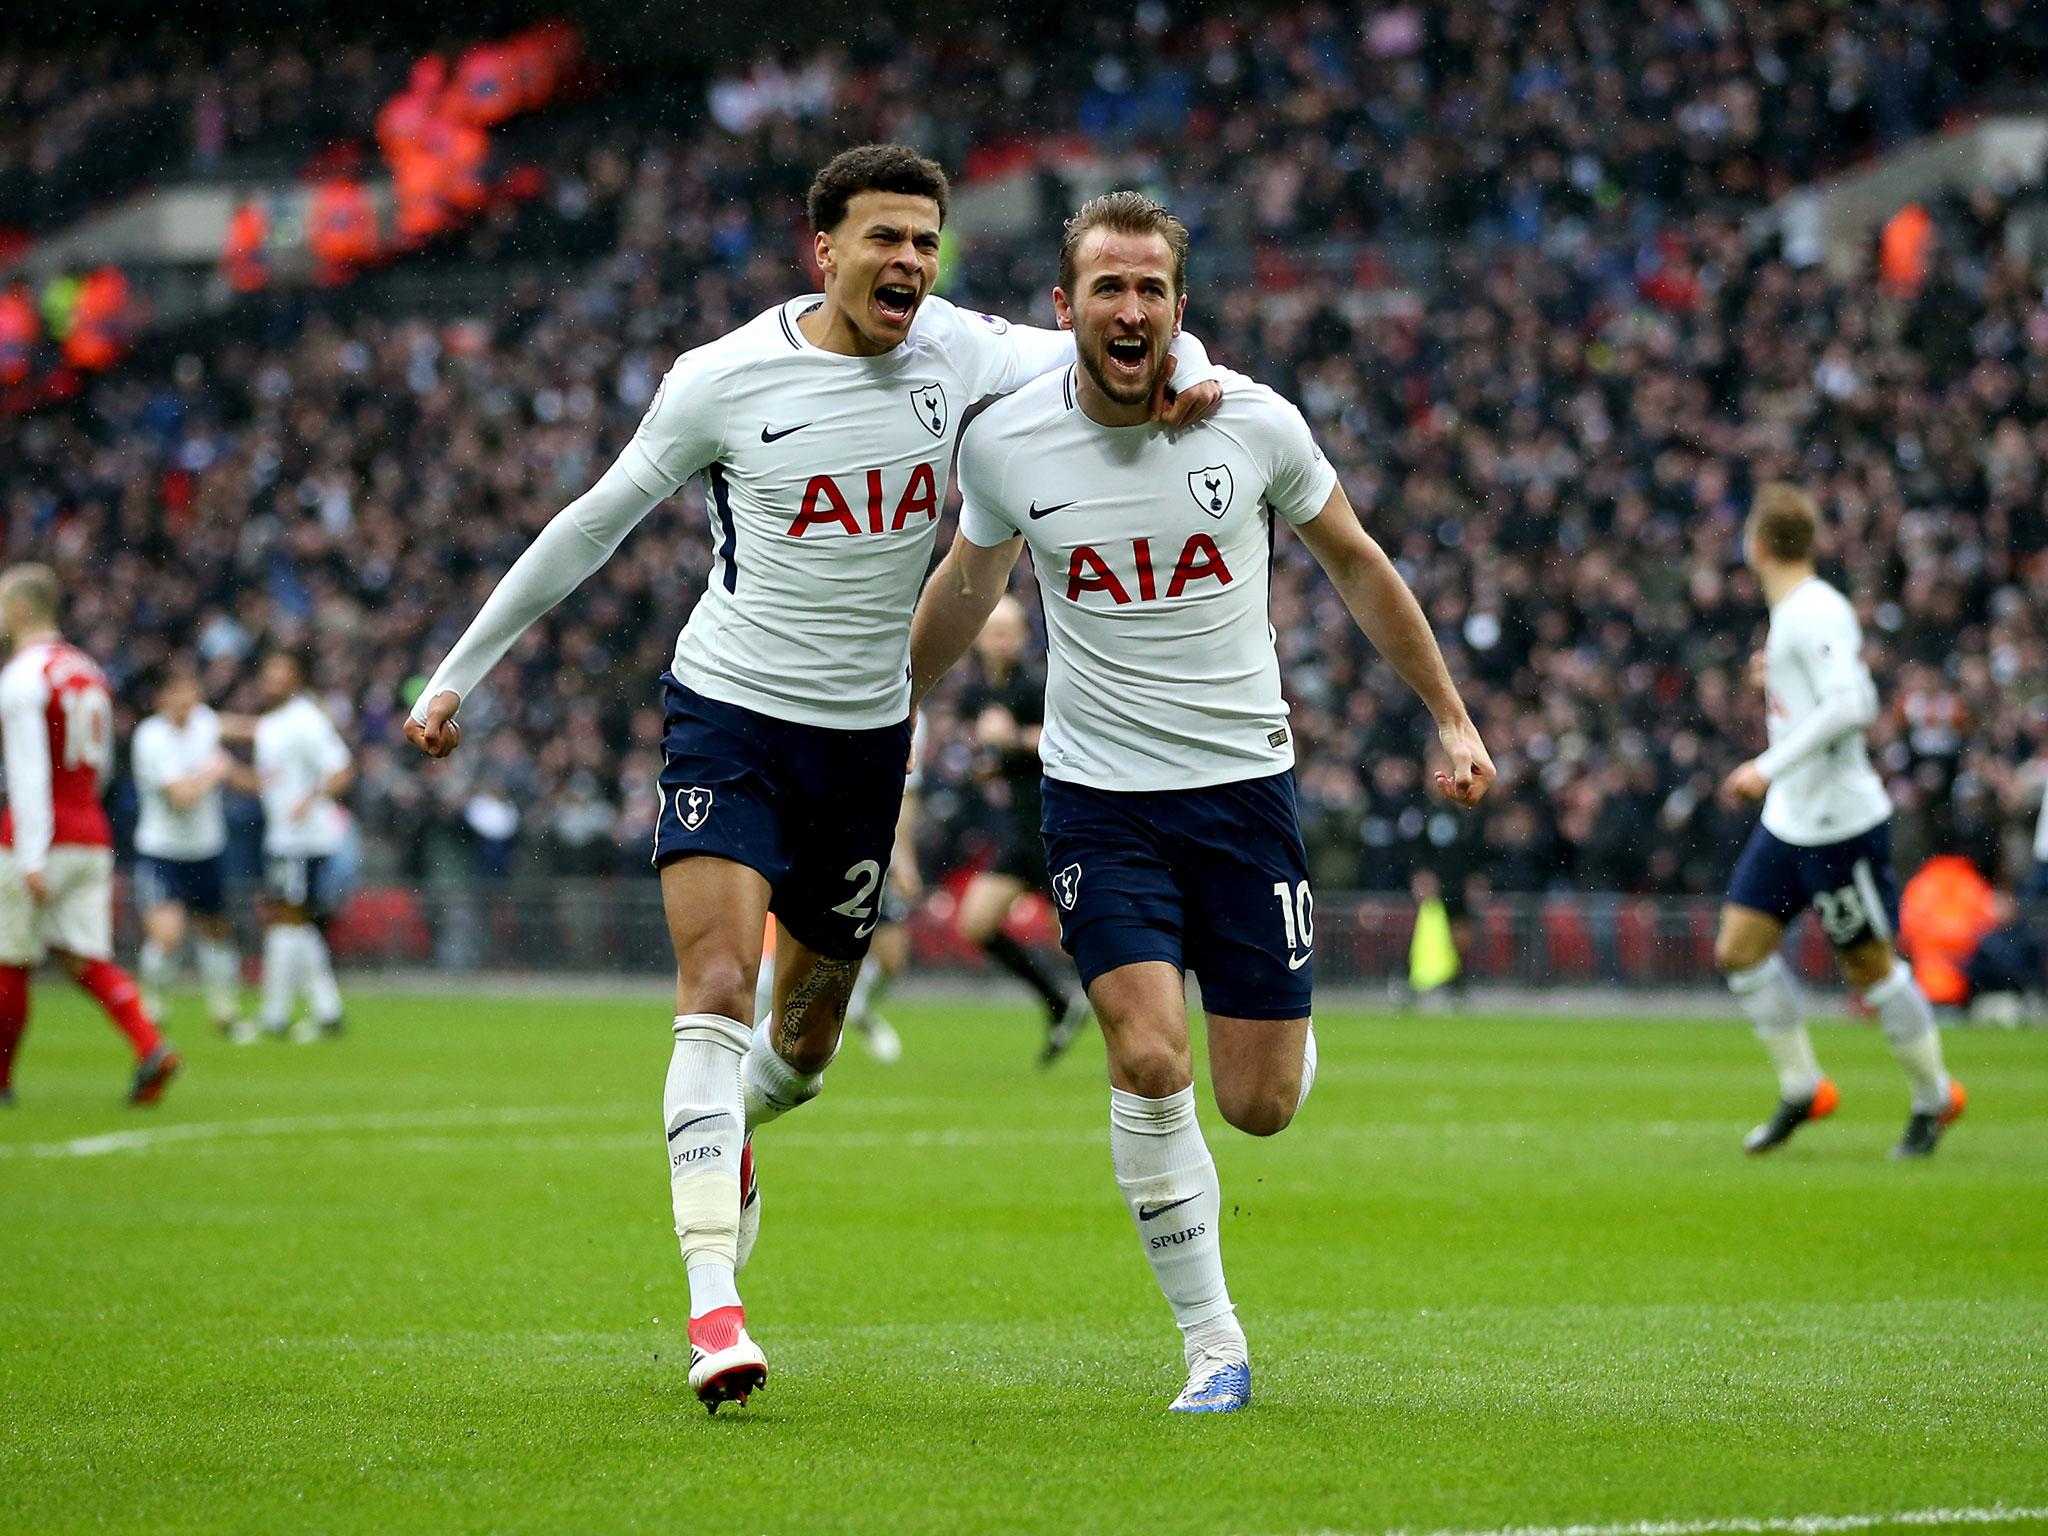 Kane and Alli are rising prospects of the European game